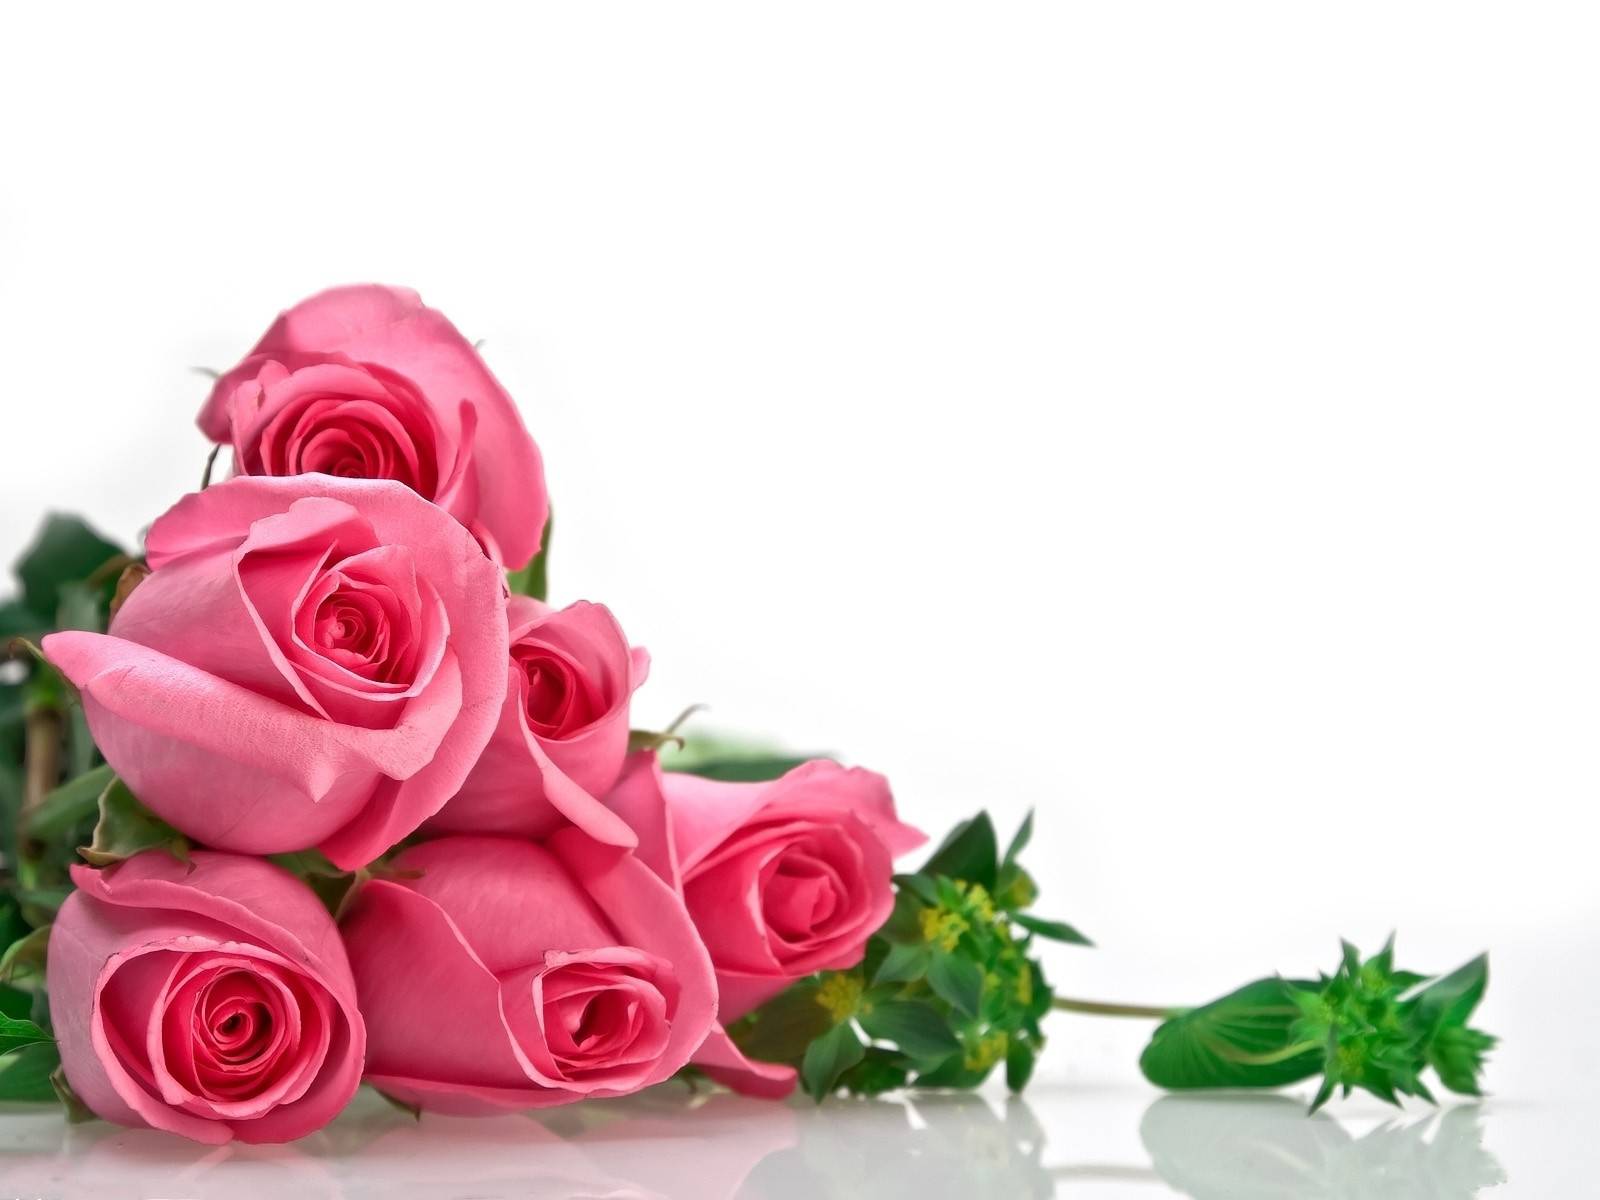 Flowers Images Roses For Desktop 5 HD Wallpapers